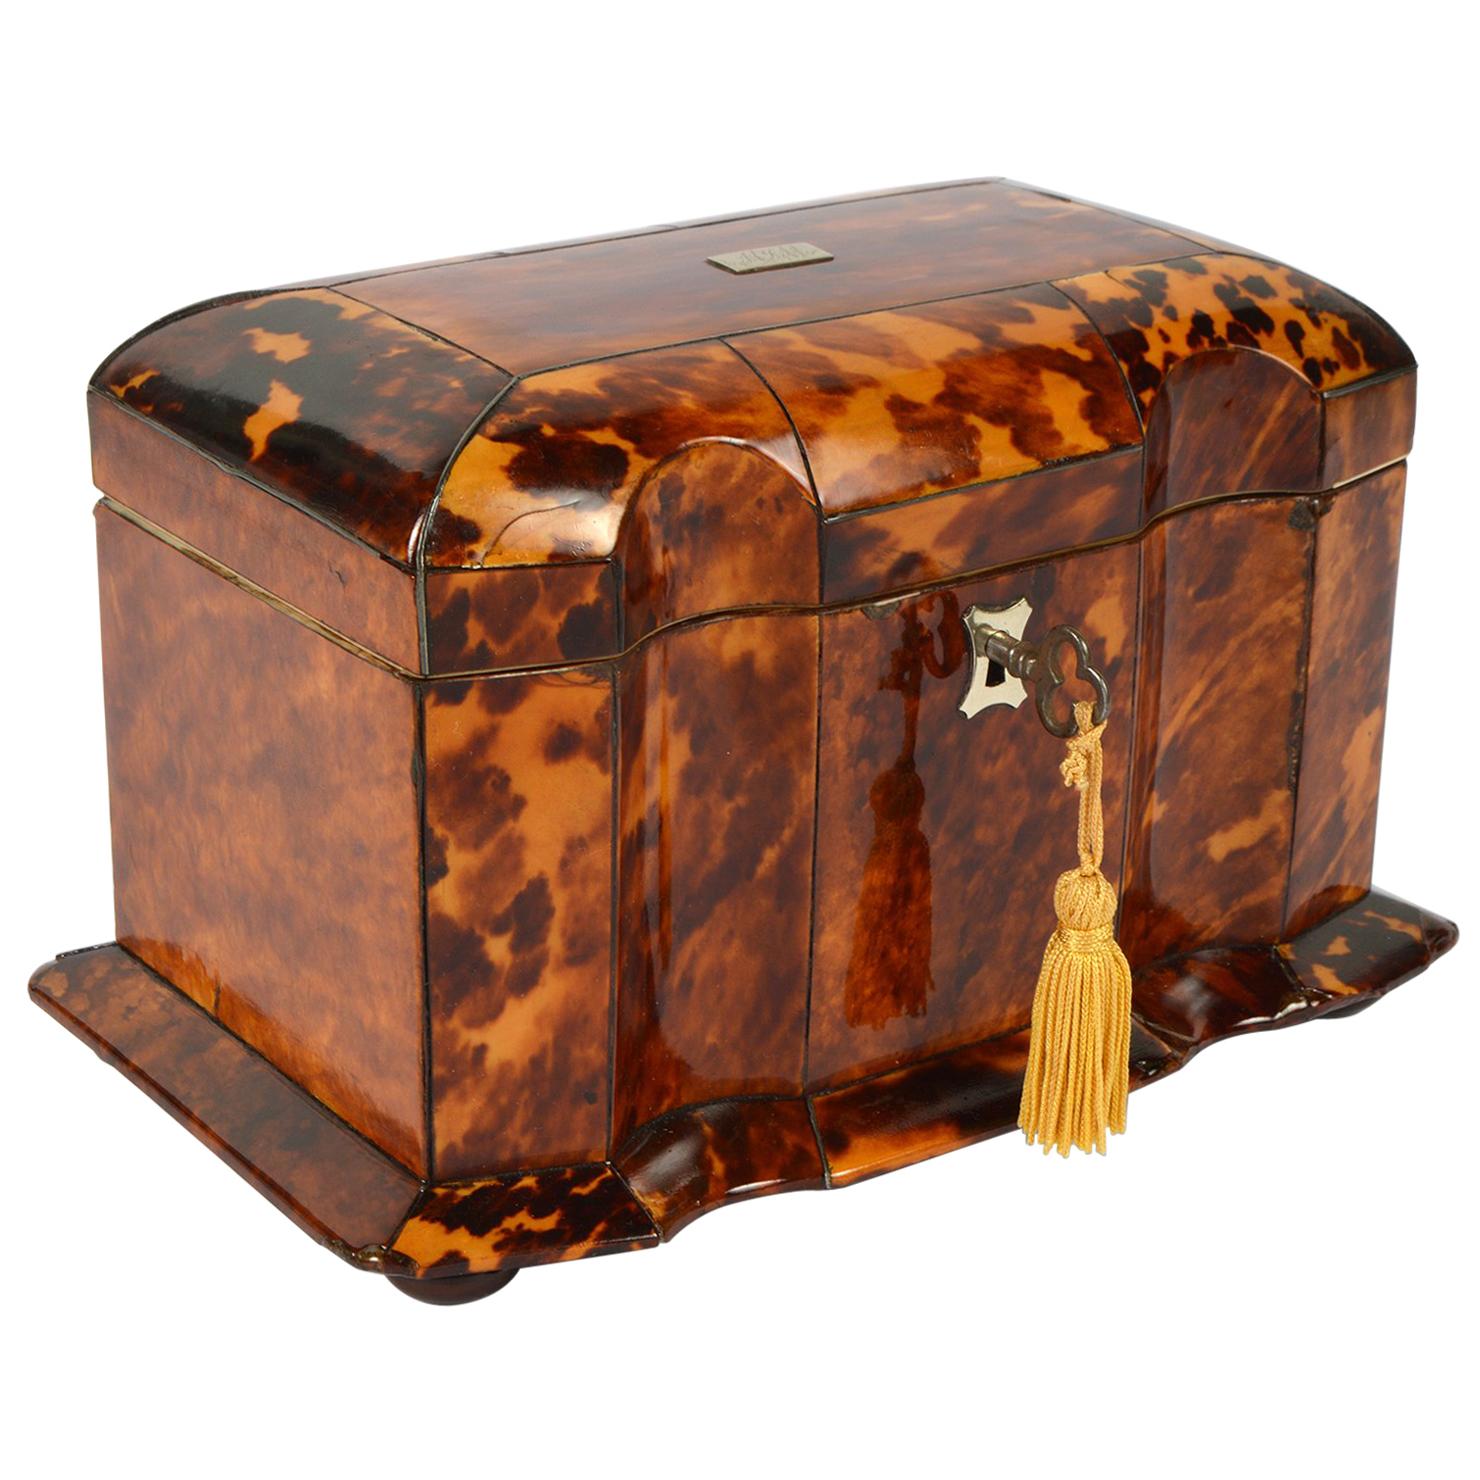 Early 19th Century English Regency Tortoise Shell Shaped Front Tea Caddy